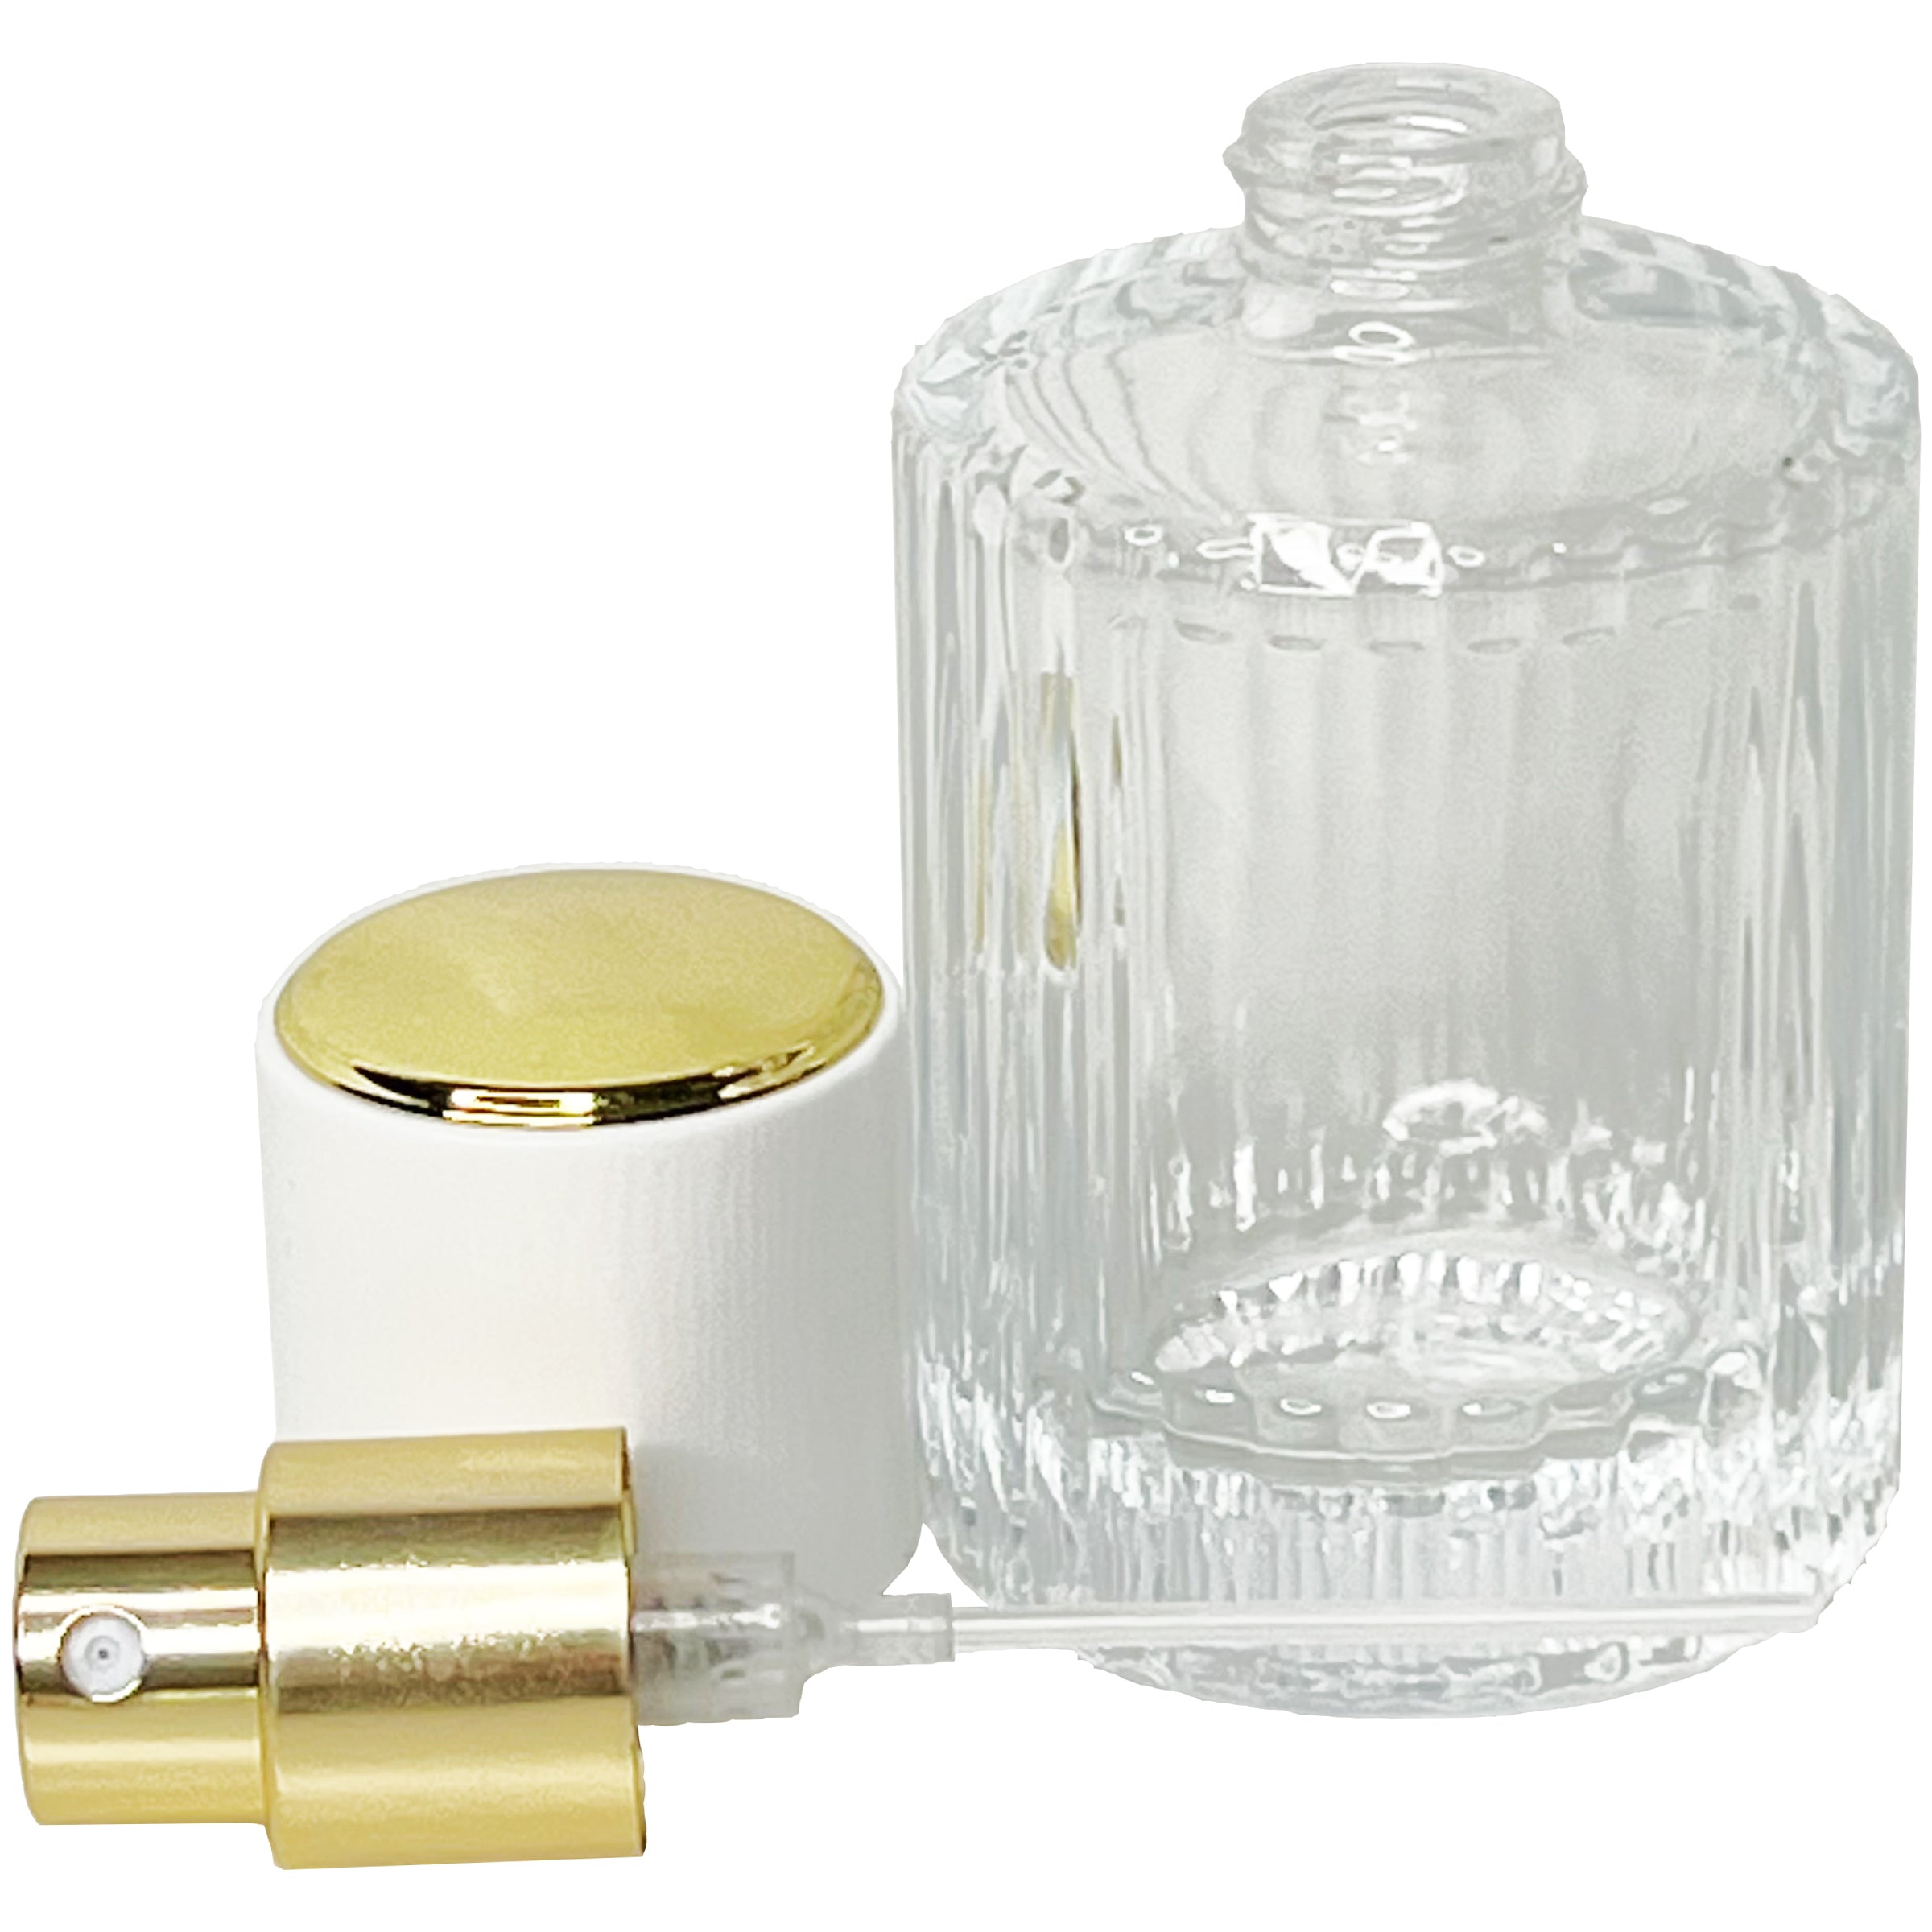 30ml 1oz Thick Glass perfume bottle striped cylinder upgraded white gold caps